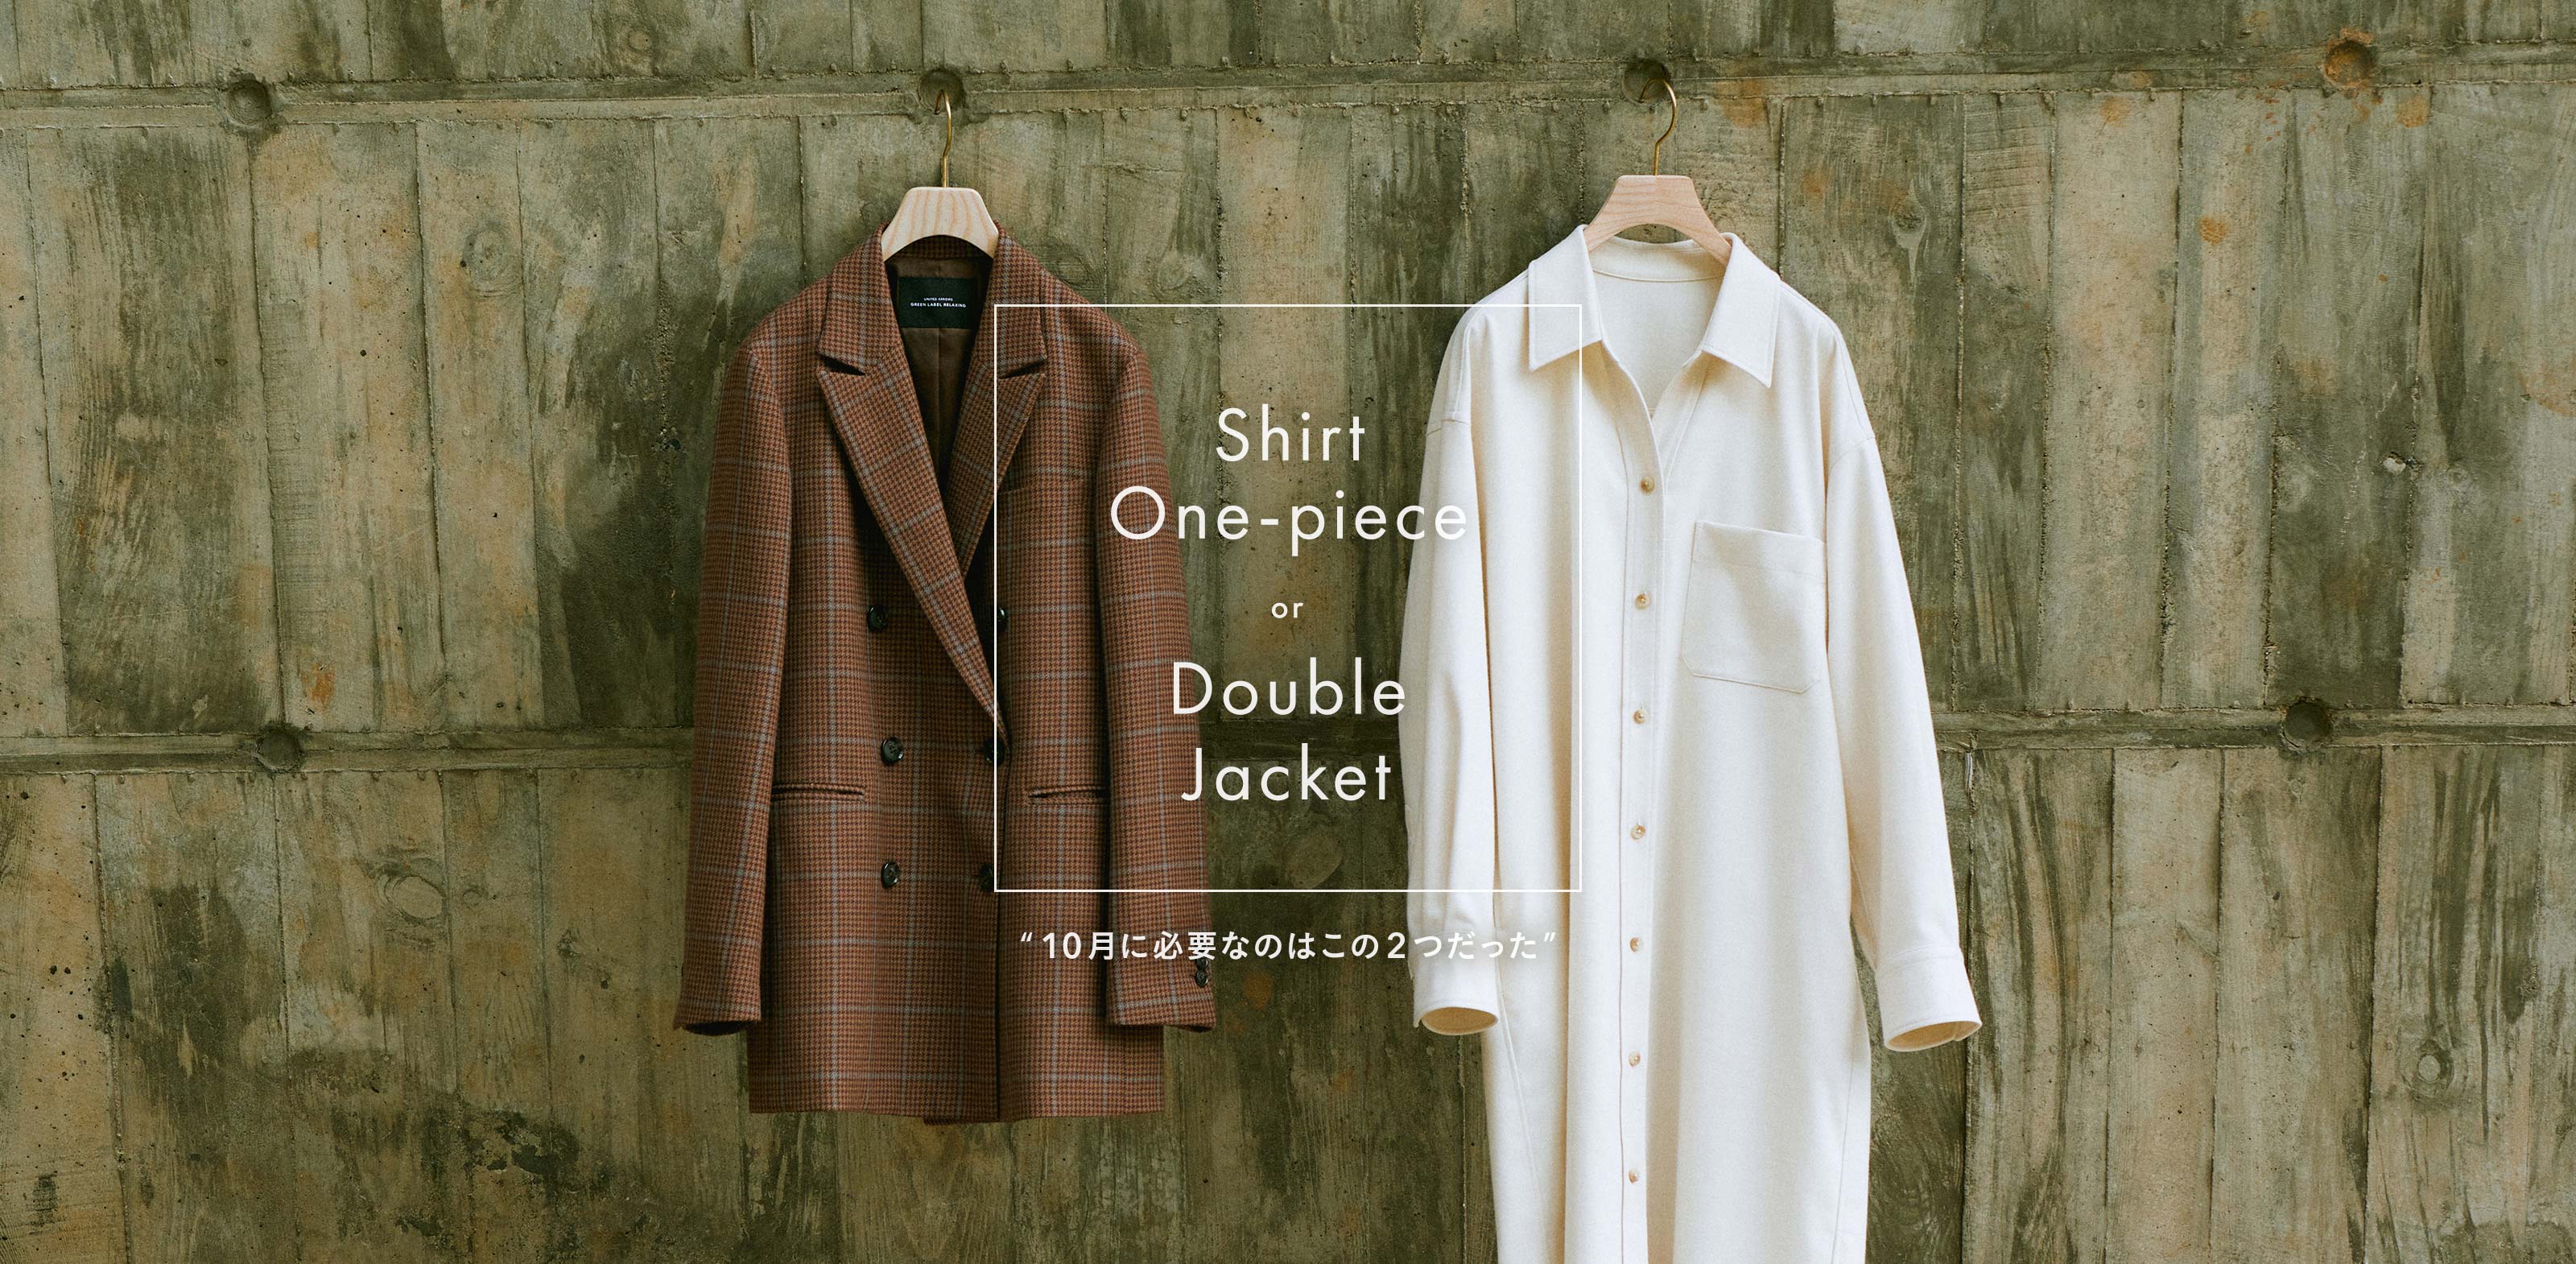 Shirt One-piece or Double Jacket -10月に必要なのはこの2つだった-